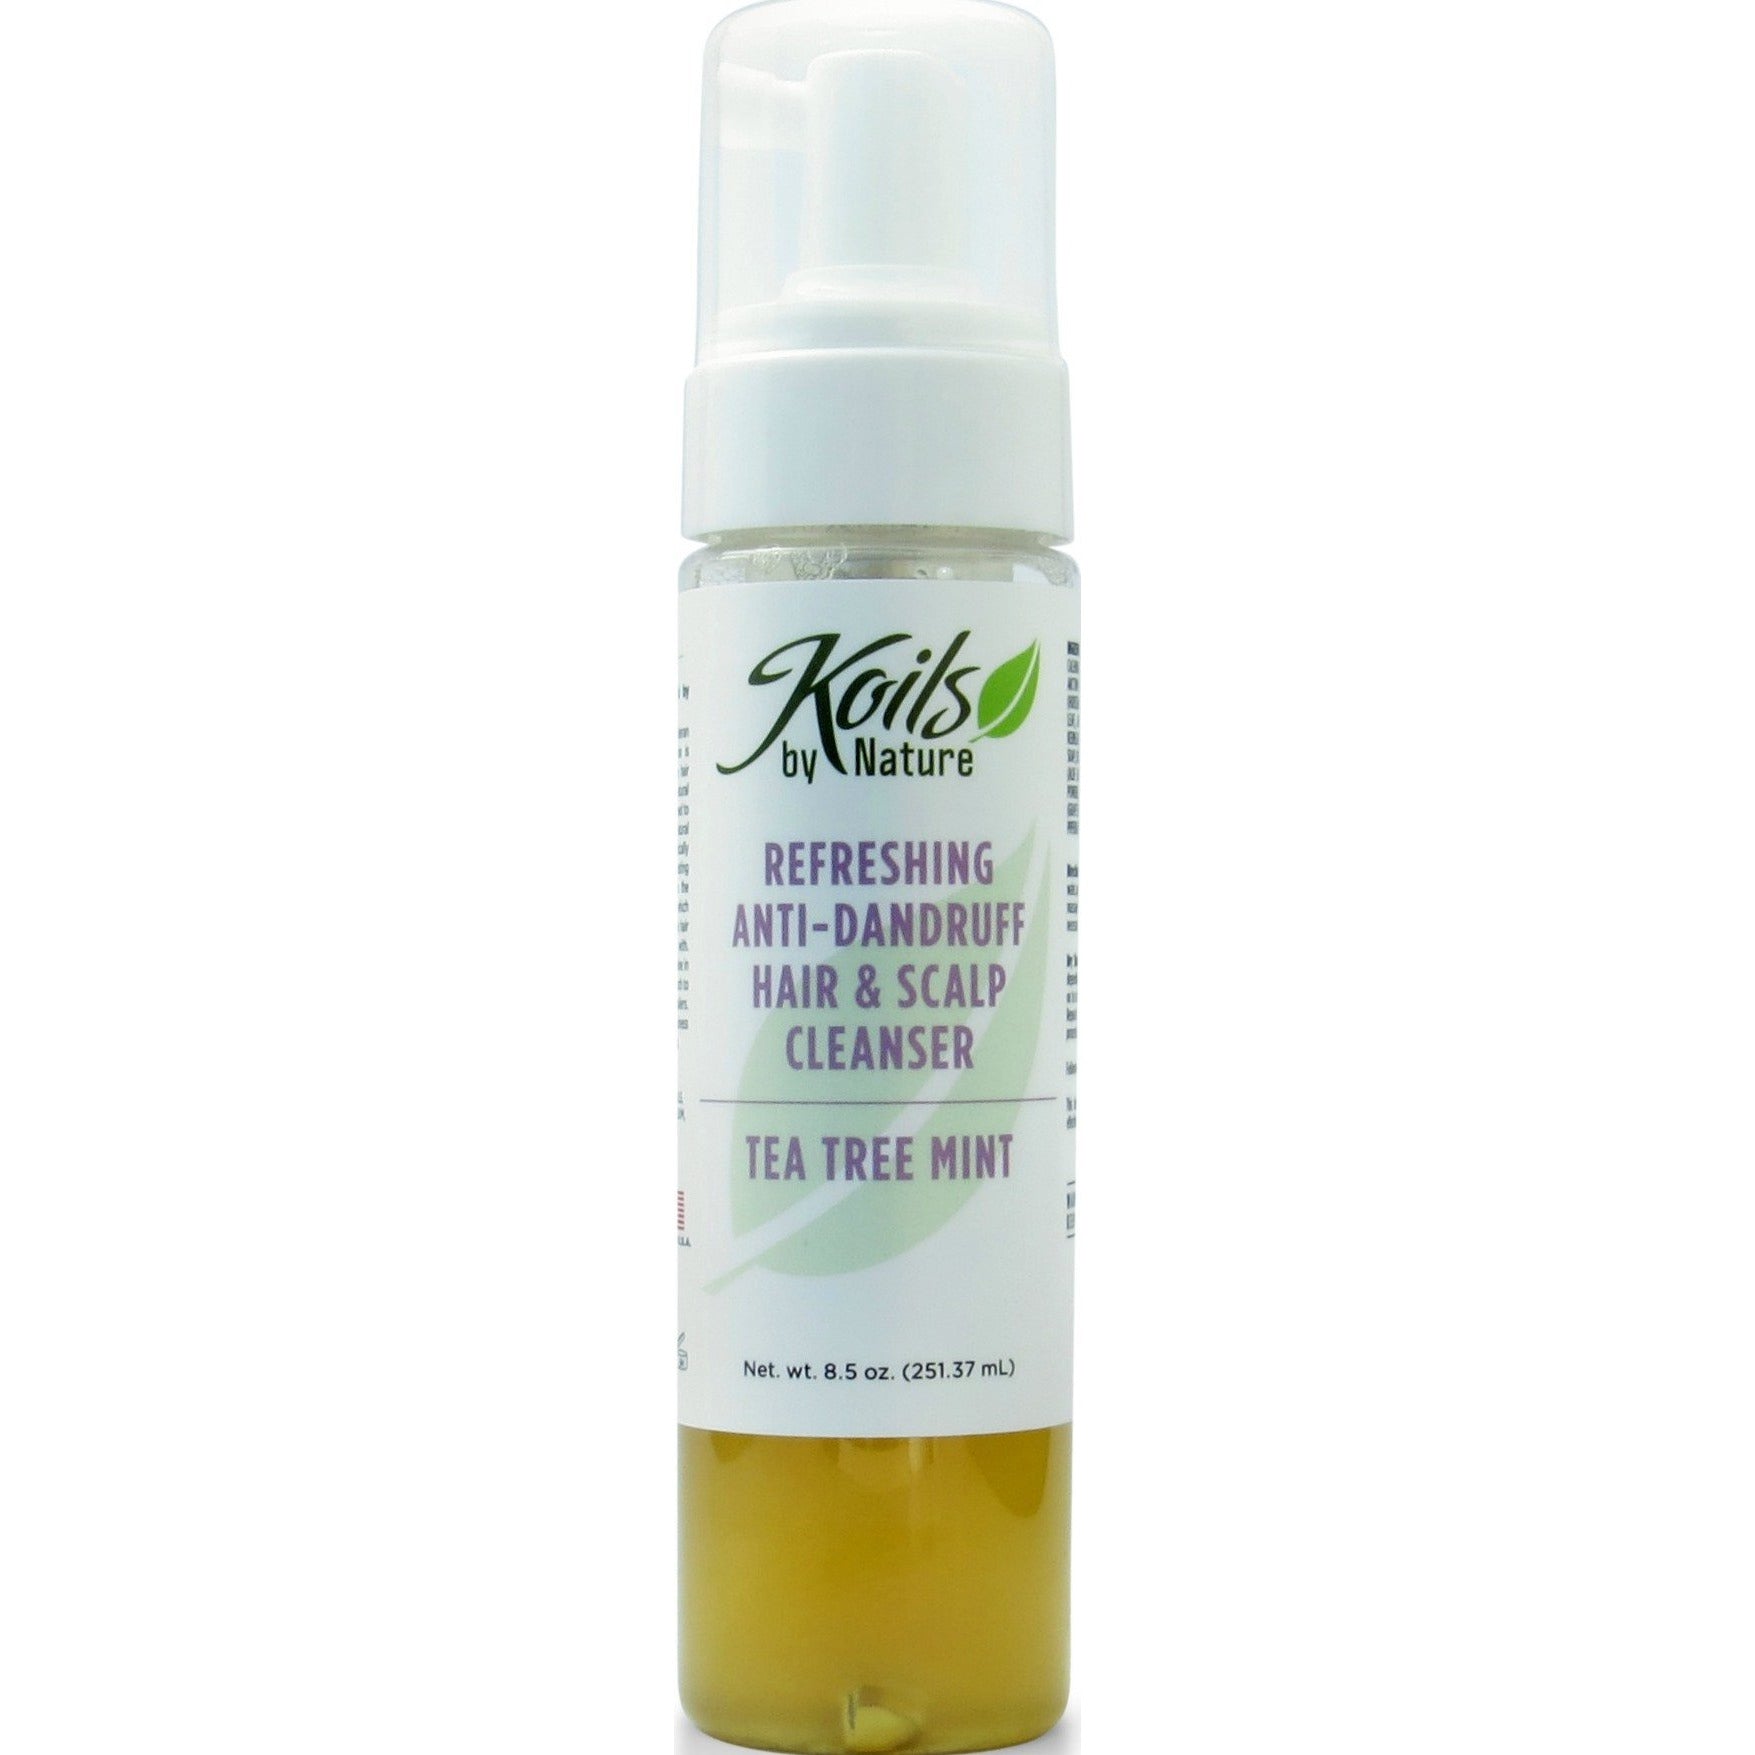 4th Ave Market: Koils by Nature Refreshing Anti Dandruff Cleanser Tea Tree Mint